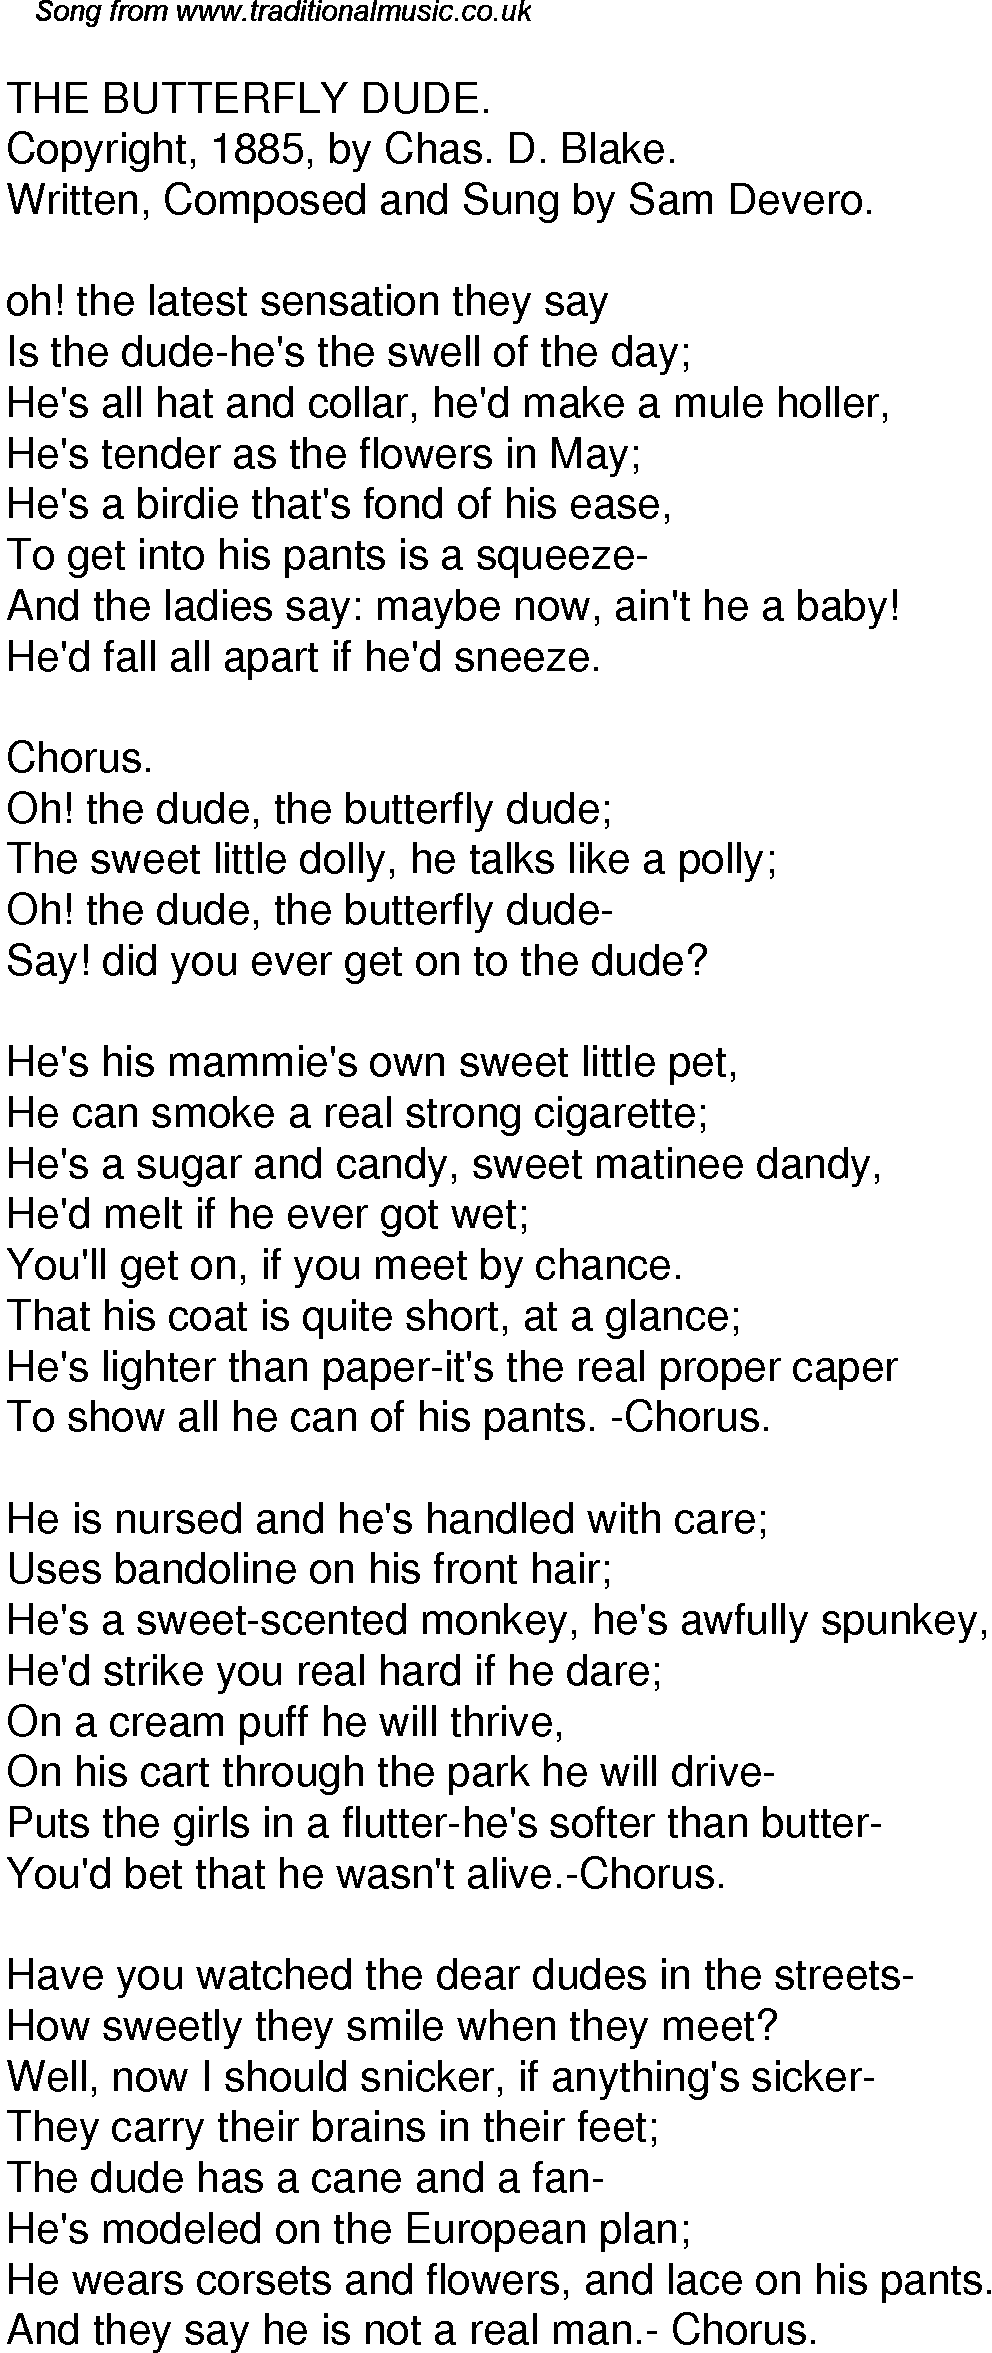 Old Time Song Lyrics For 32 The Butterfly Dude